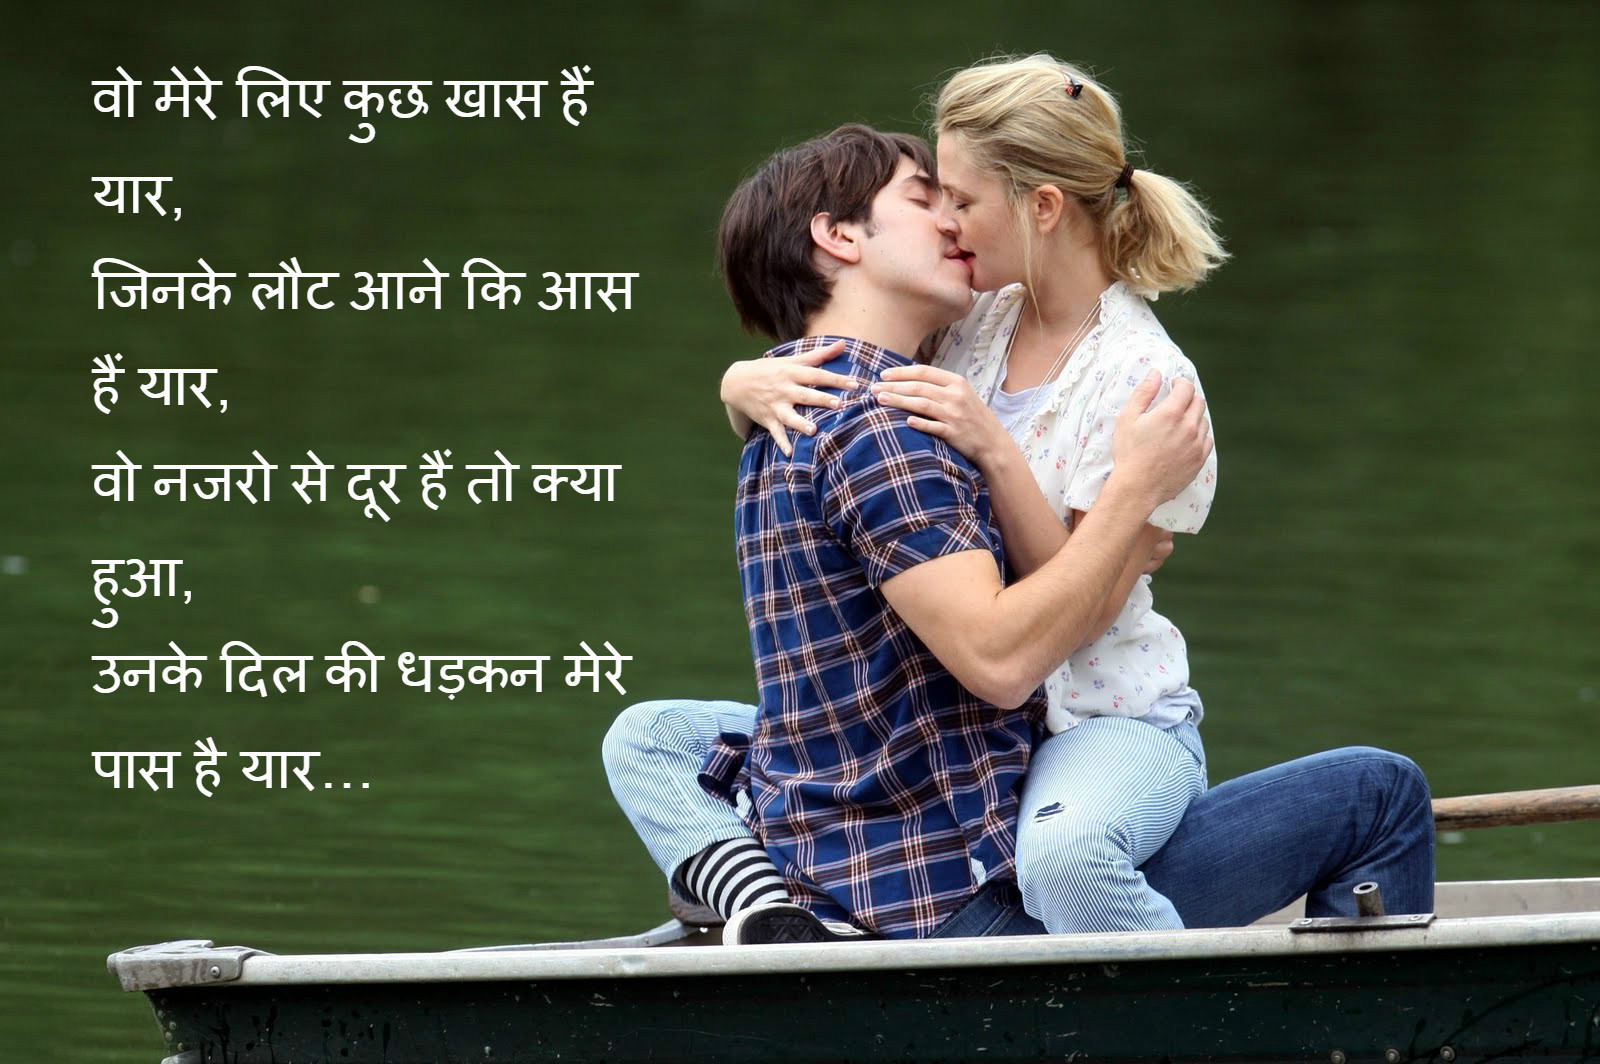 Best 30 Collection of Hindi Shayari for whatsapp Best & Latest Romantic Love Shayari Sms Messages in Hindi for Gf Bf with Lovely Pics